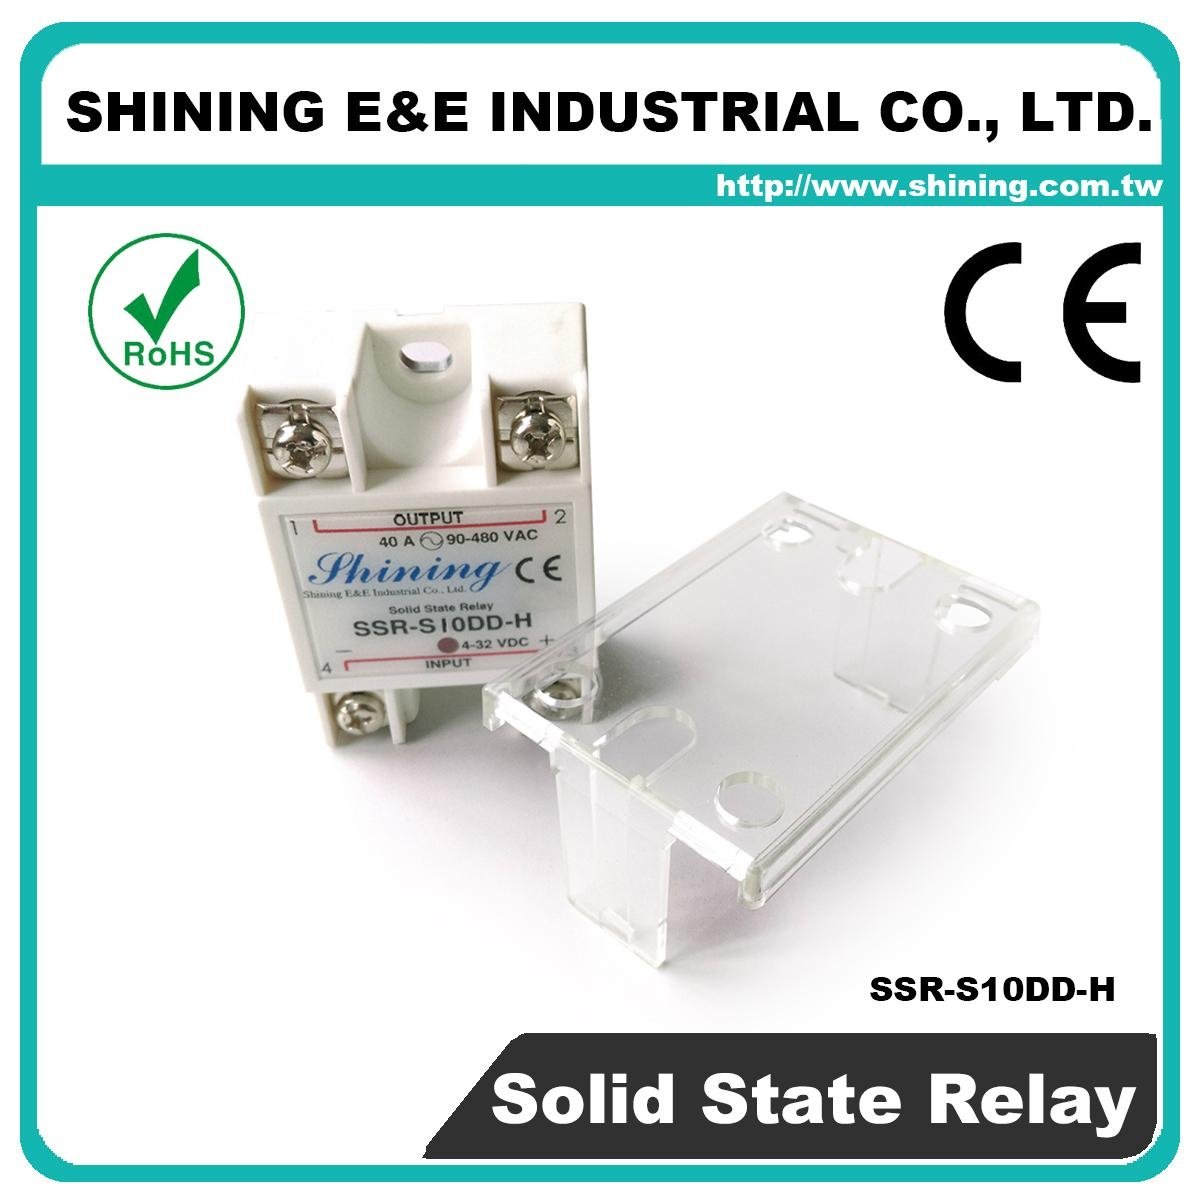 SSR-S10DD-H DC to DC Single Phase Photocouple Solid State Relay 2